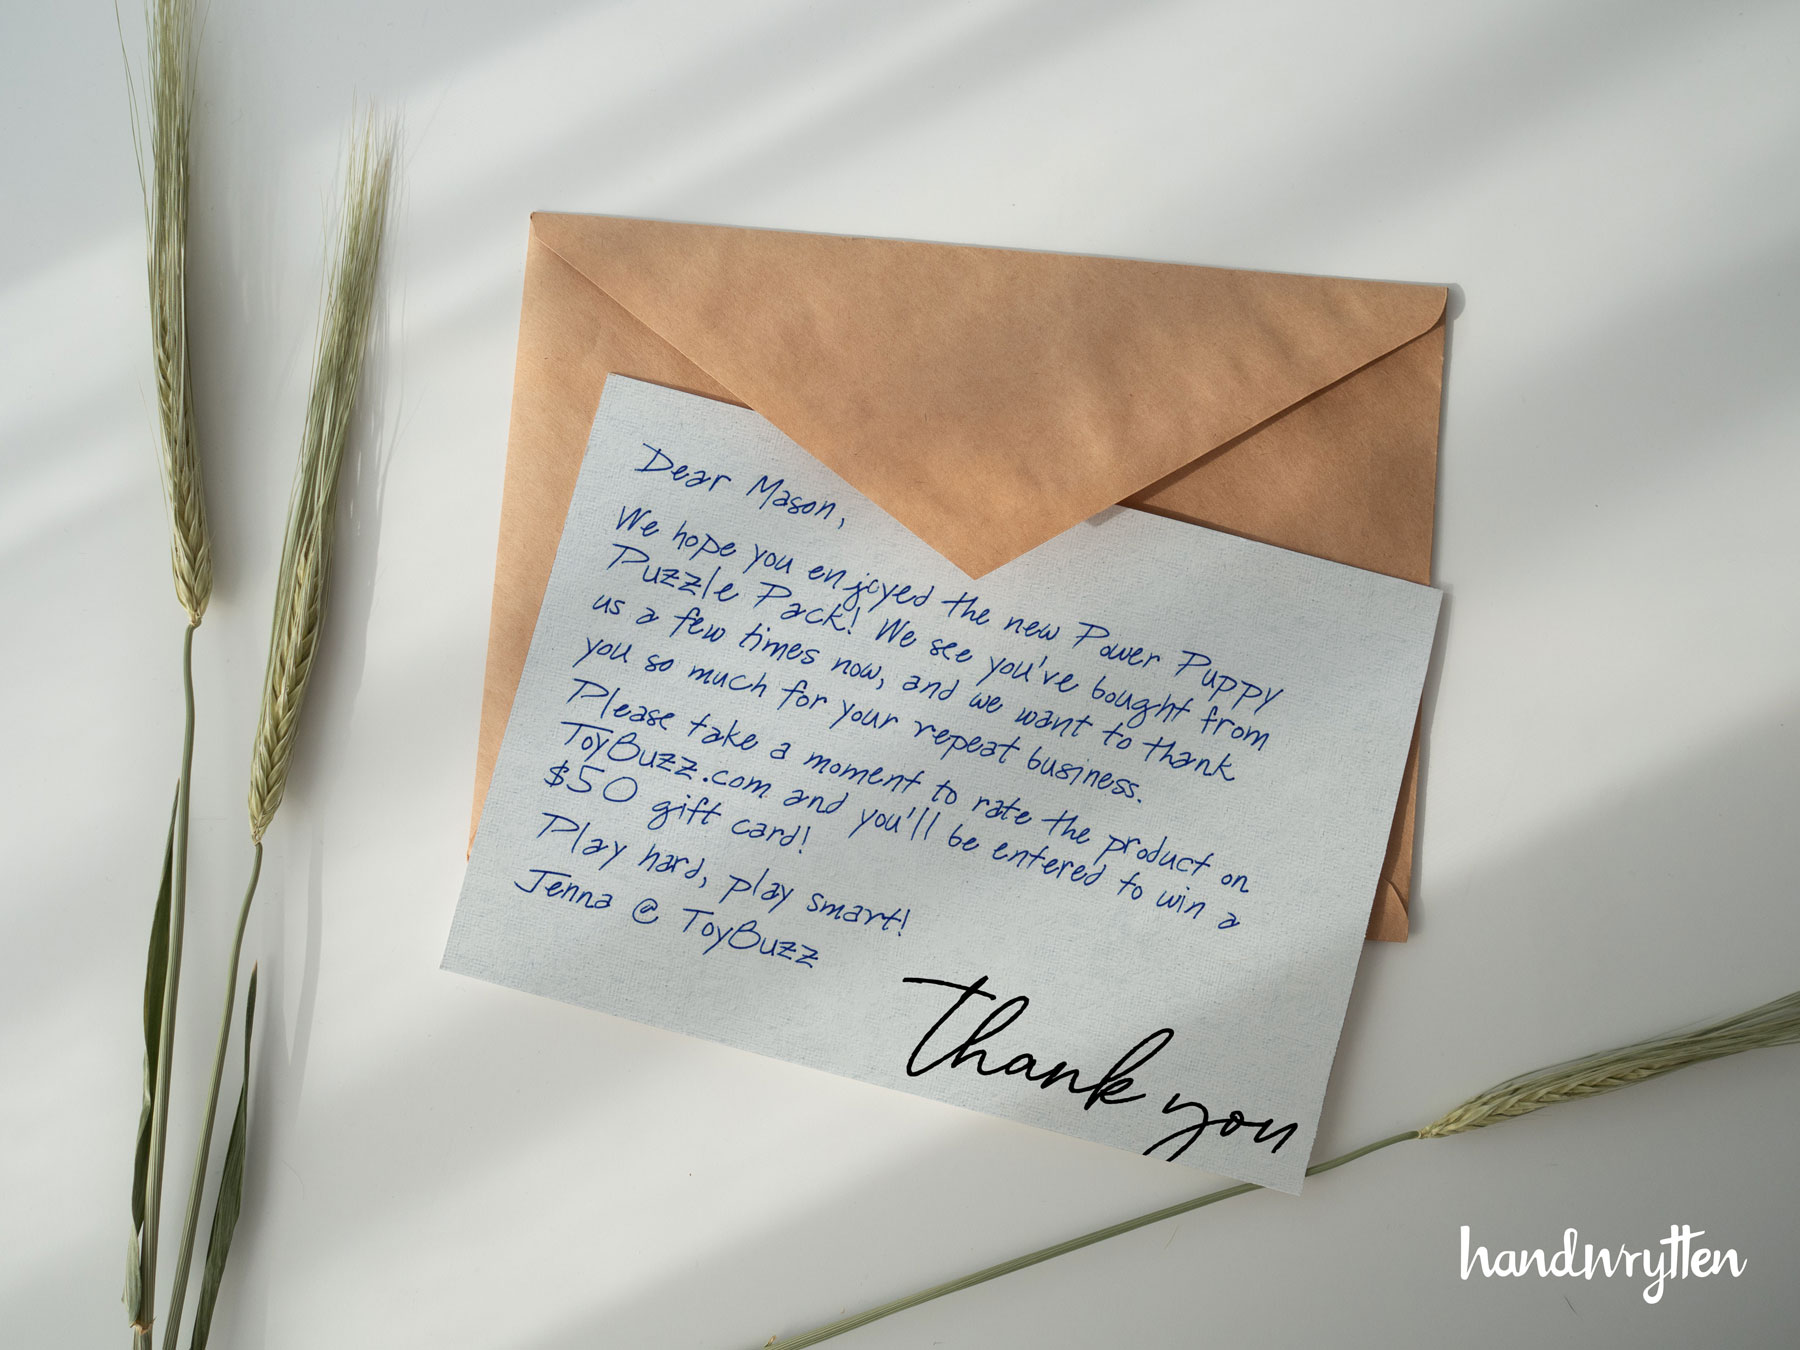 handwritten note requesting a product review